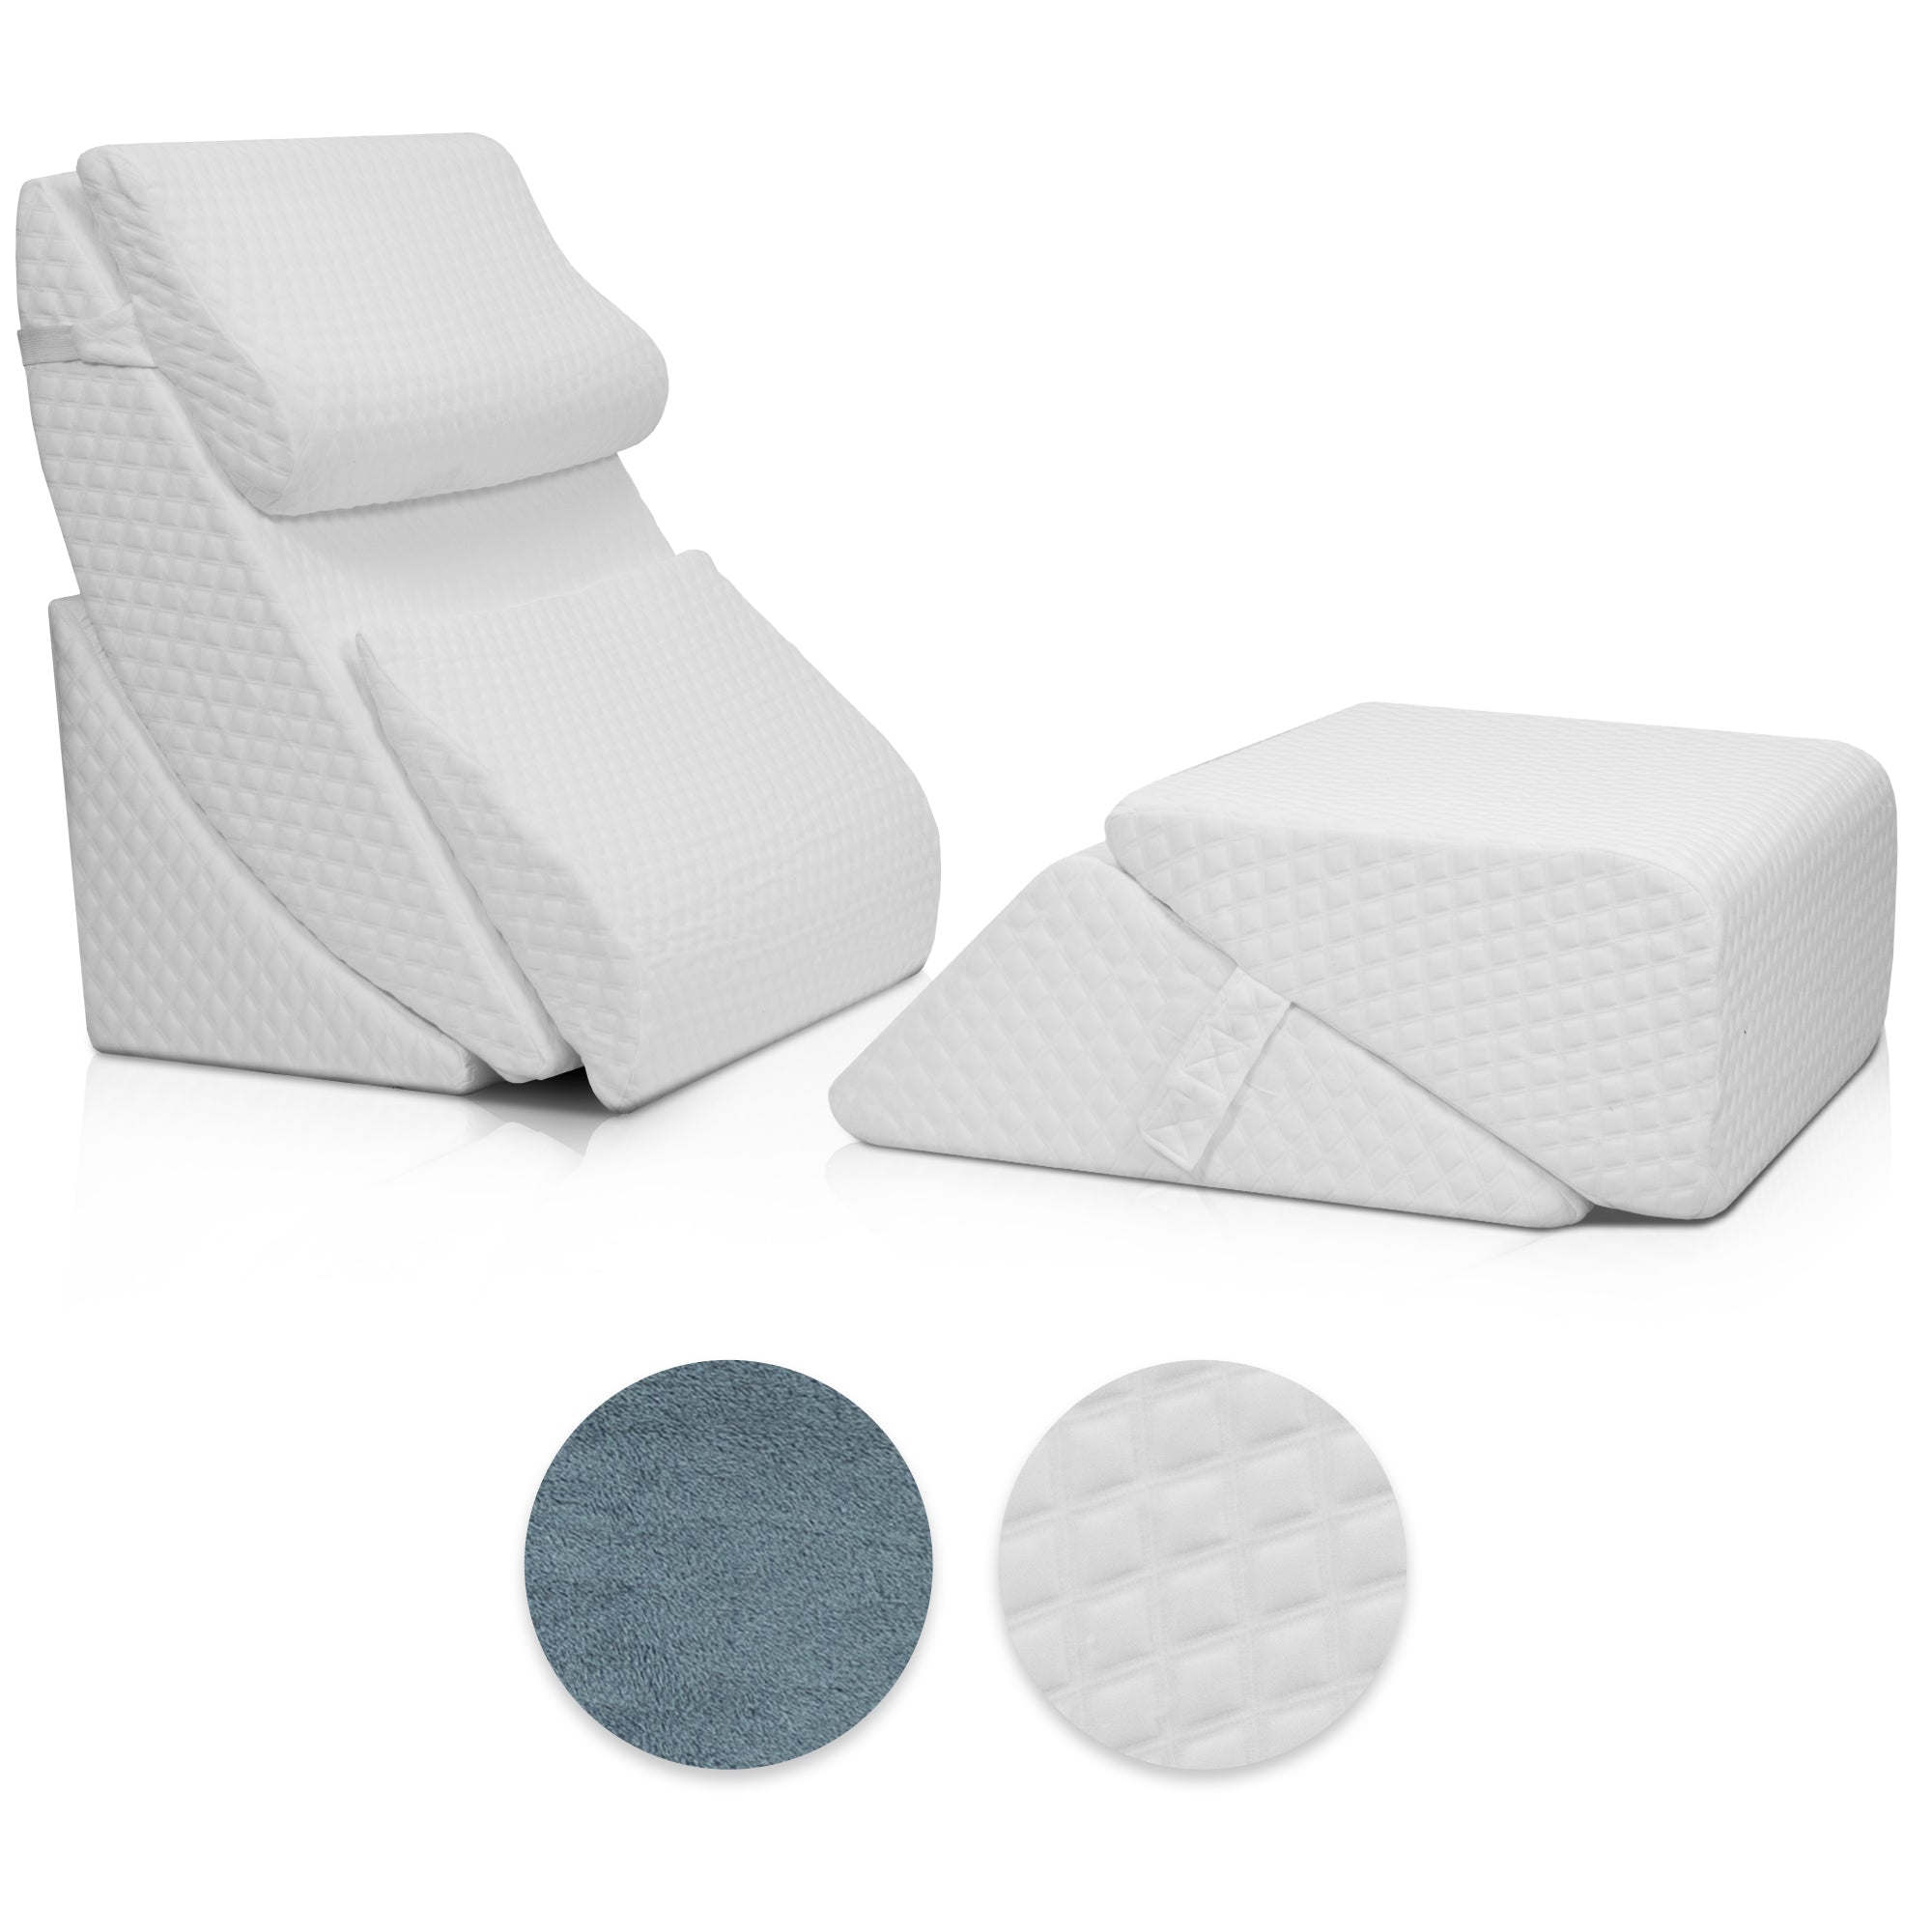 Cover Set Only for LX13, White, Pillows and Foam not Included